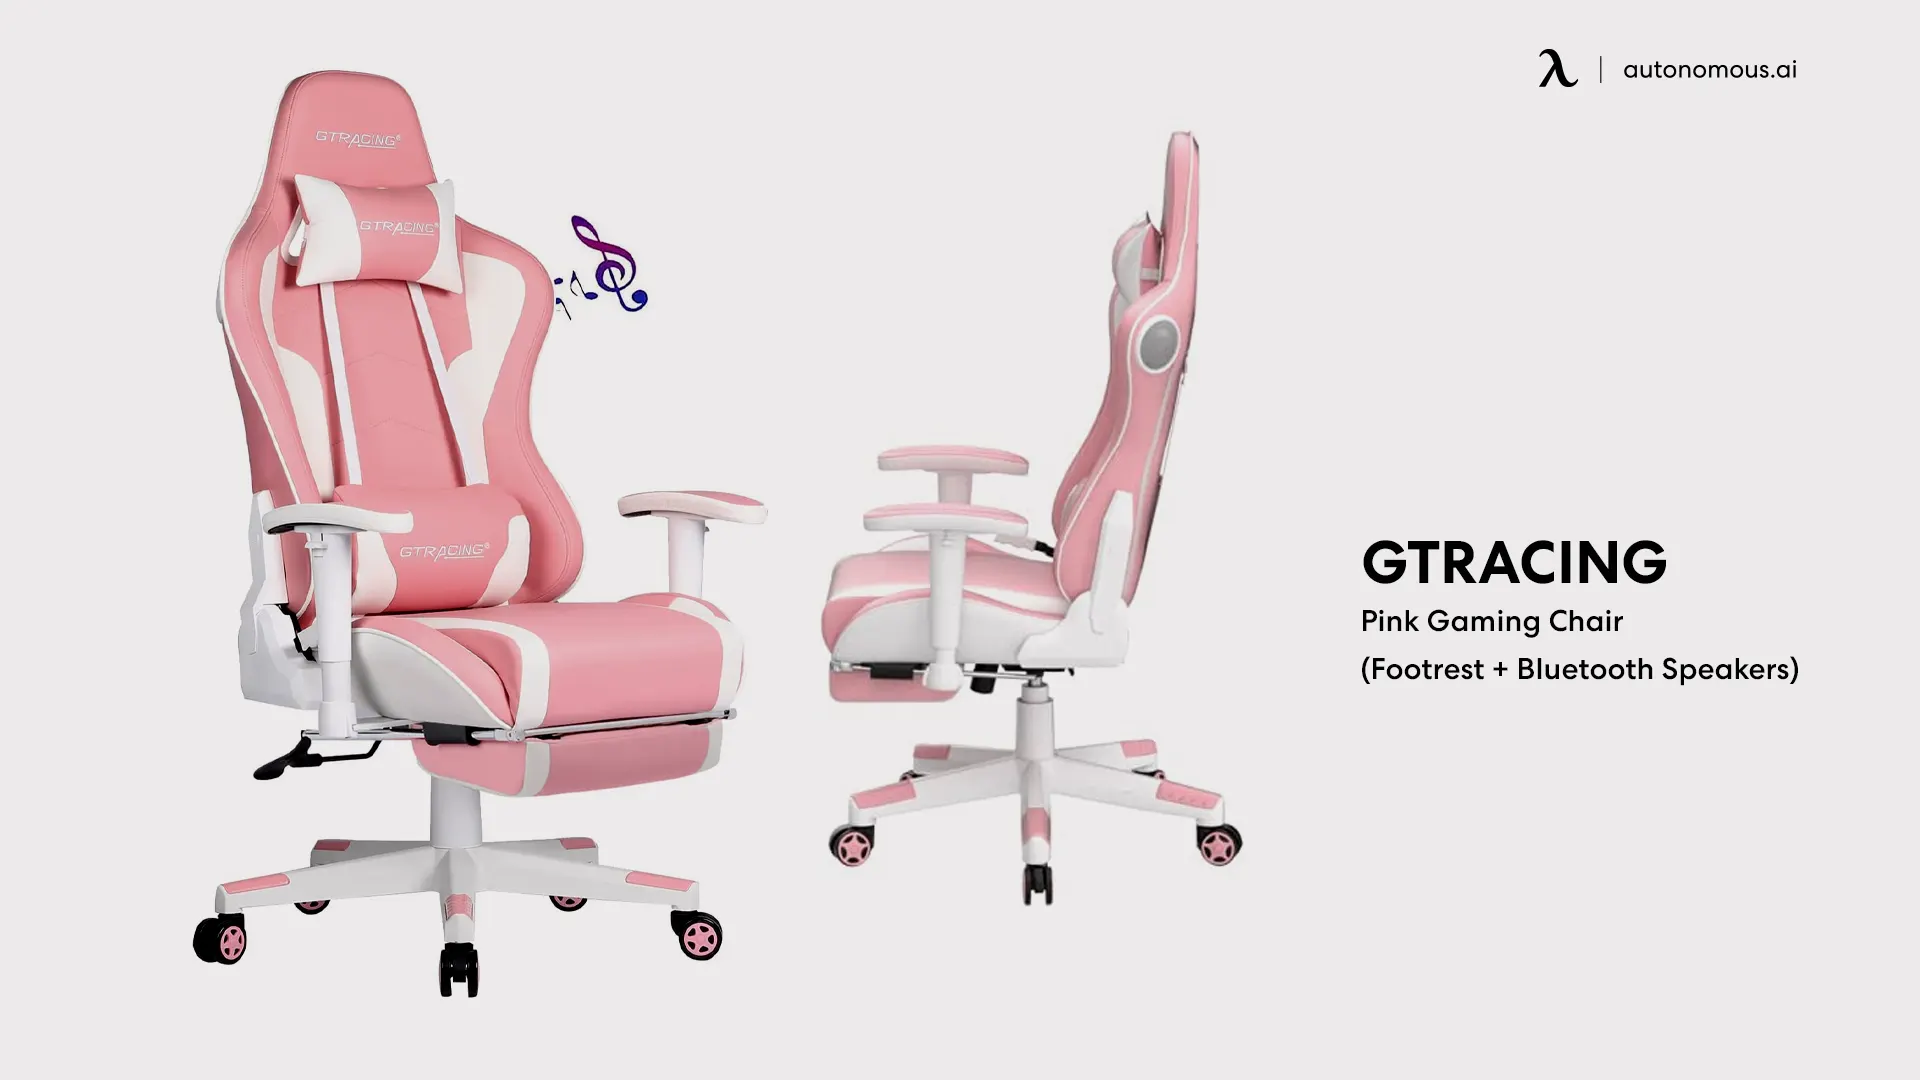 GTRacing Pink Gaming Chair (Footrest + Bluetooth Speakers)